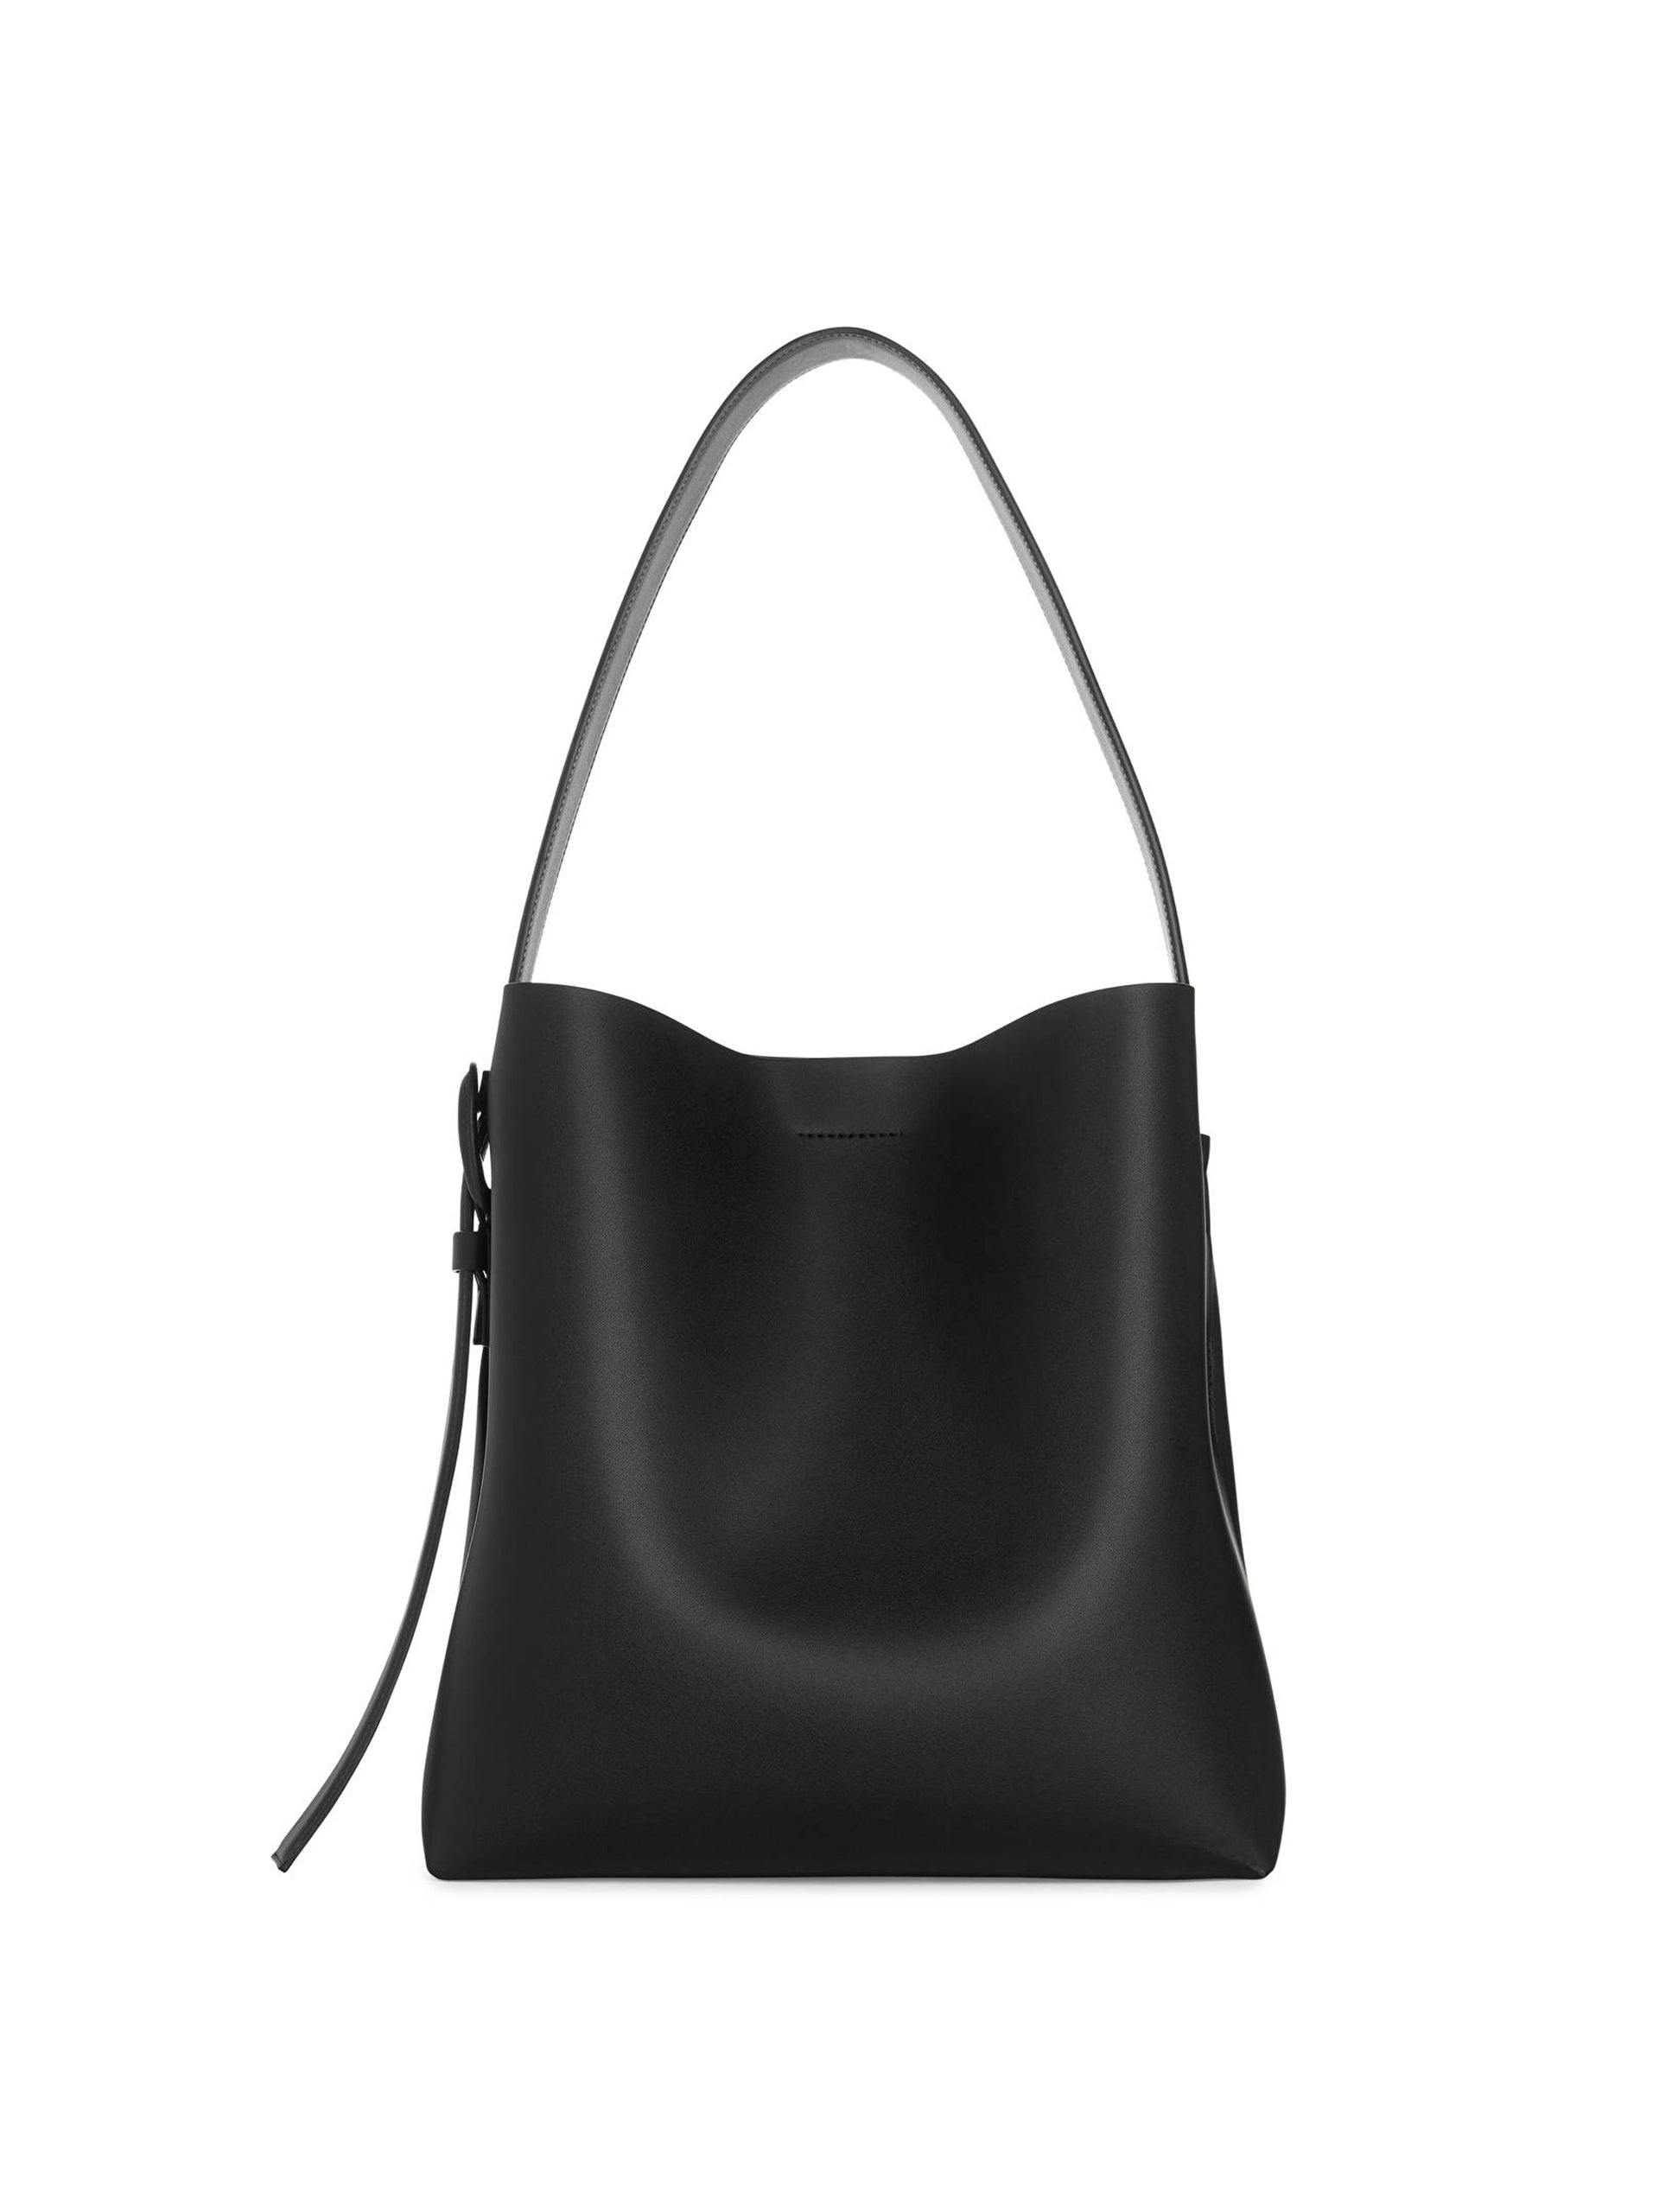 Black leather tote with buckle